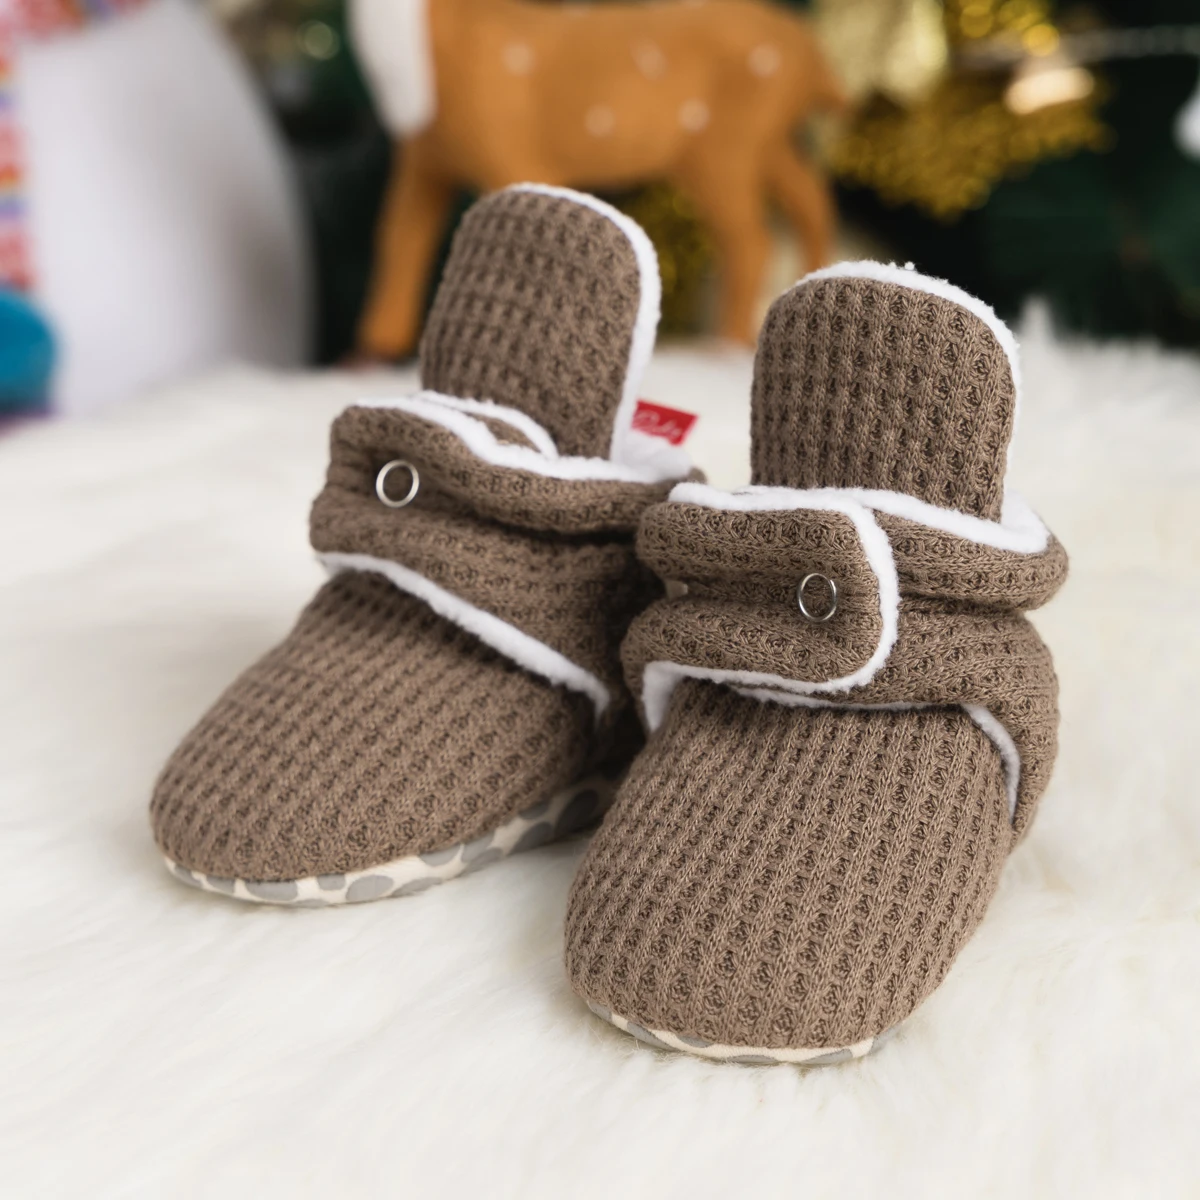 New Design Cotton Elastic Baby Socks Booties Crib Shoes For Babies Winter Wearing